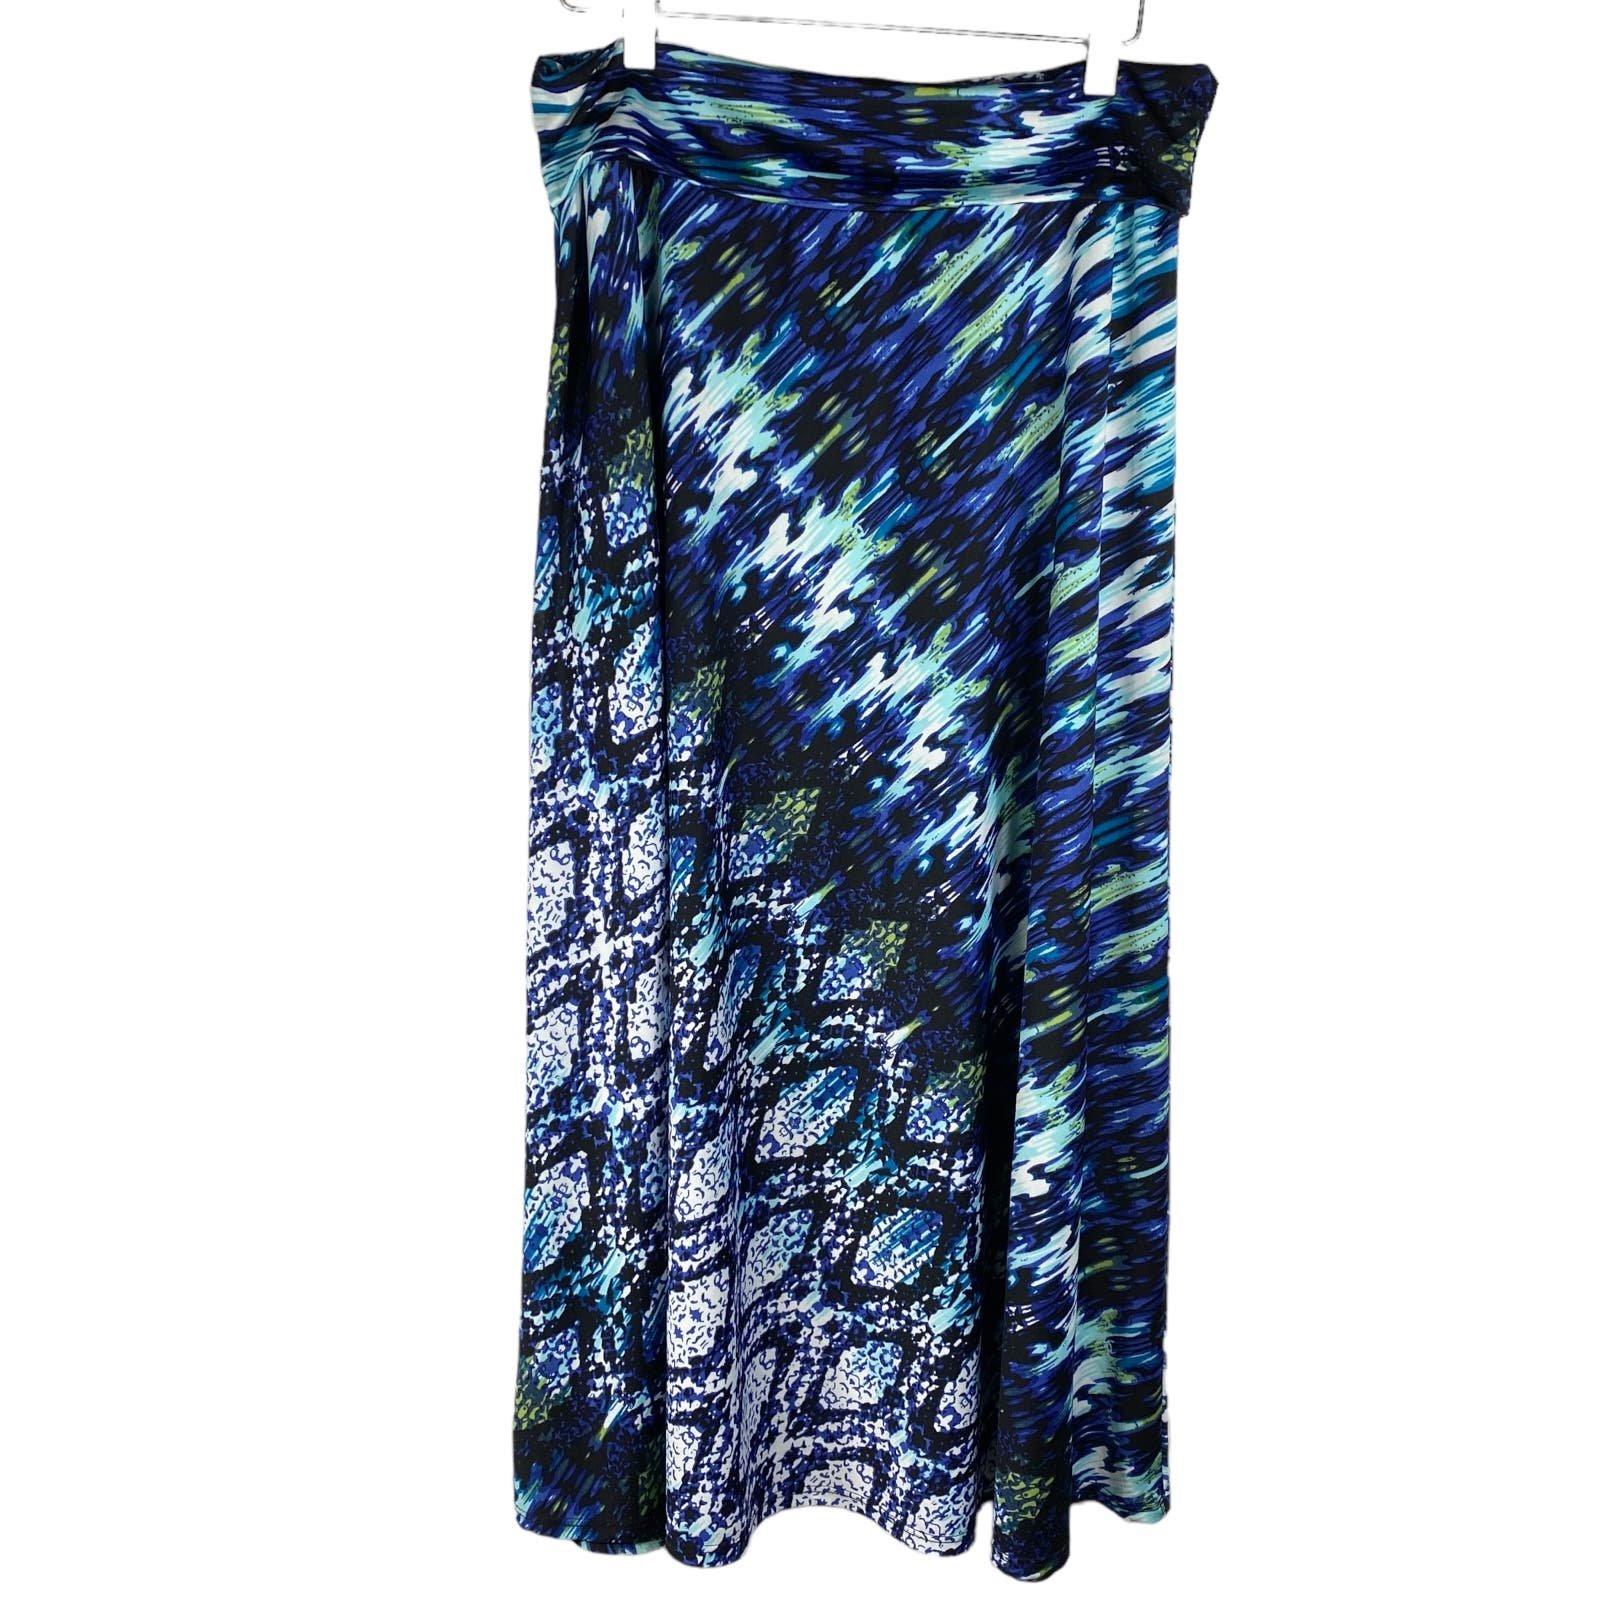 save up to 70% Sunny Leigh Maxi Skirt Large Blue Green Watercolor Geo Print Slinky Stretchy Fqdix9MIV on sale